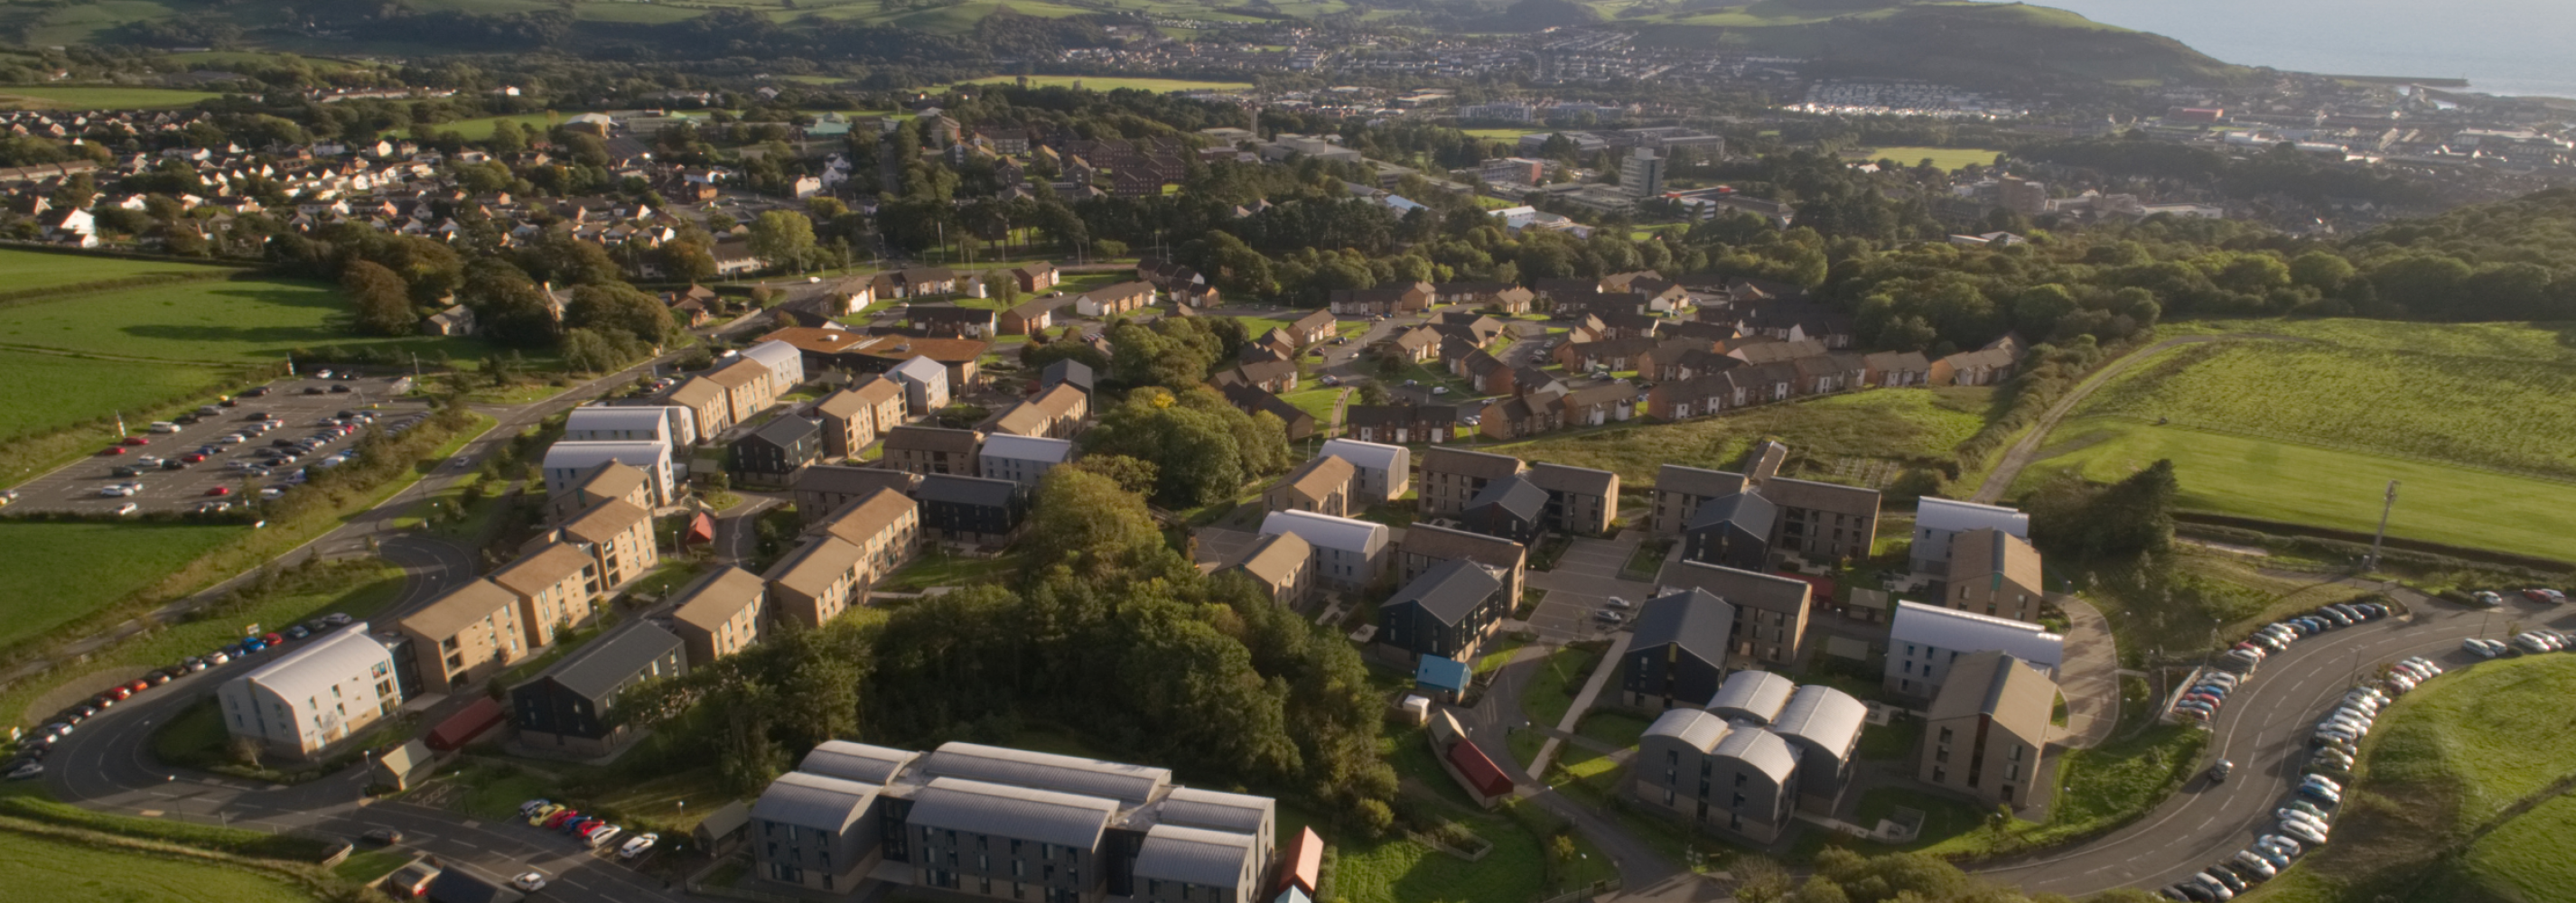 Aerial image of Fferm Penglais looking down on Pentre Jane Morgan, Penglais Campus and Aberystwyth seafront. 